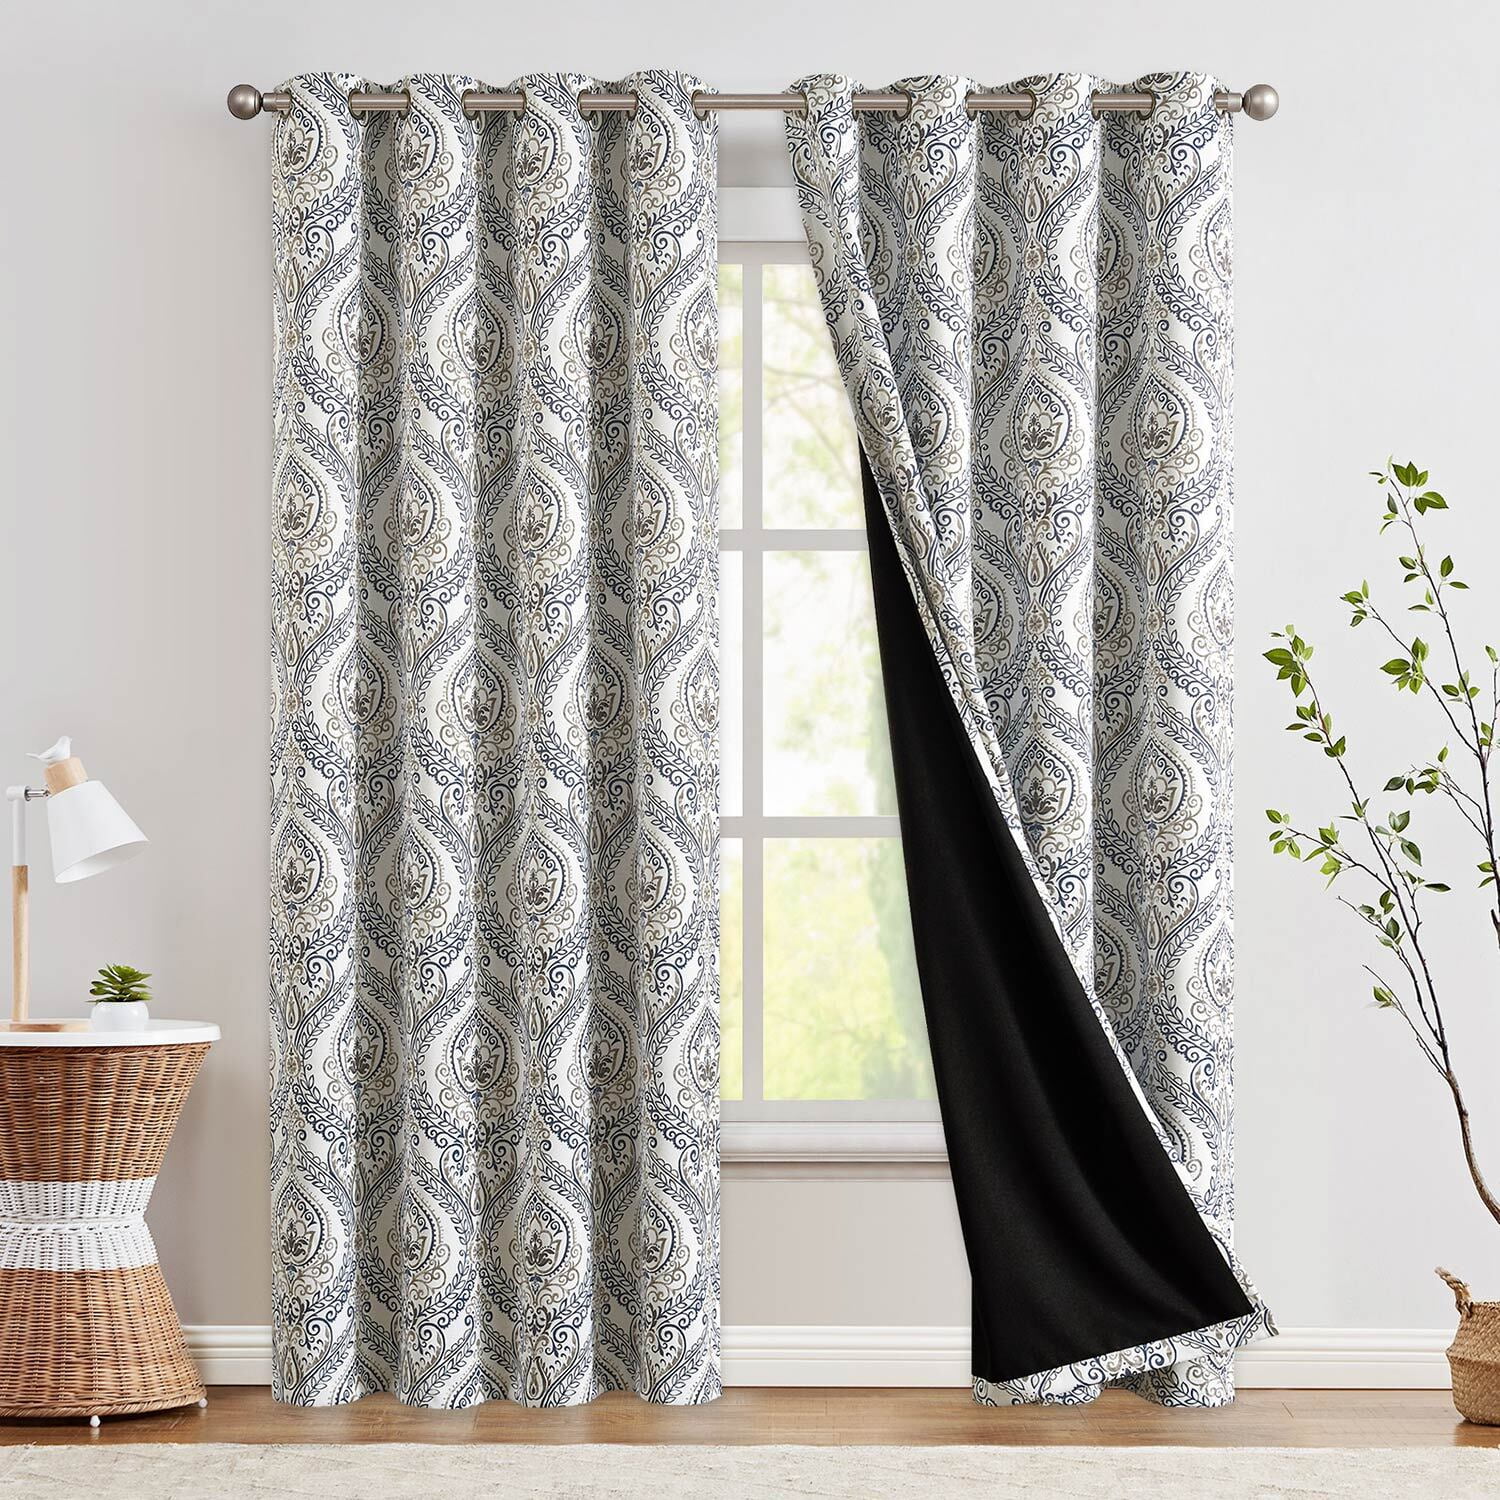 Curtainking 100% Blackout Curtains 96 in Taffy Damask Medallion Window  Curtains for Bedroom Grommet Thermal Insulated Drapes for Living Room  Vintage Luxury Window Treatments Set 2 Panels - Walmart.com